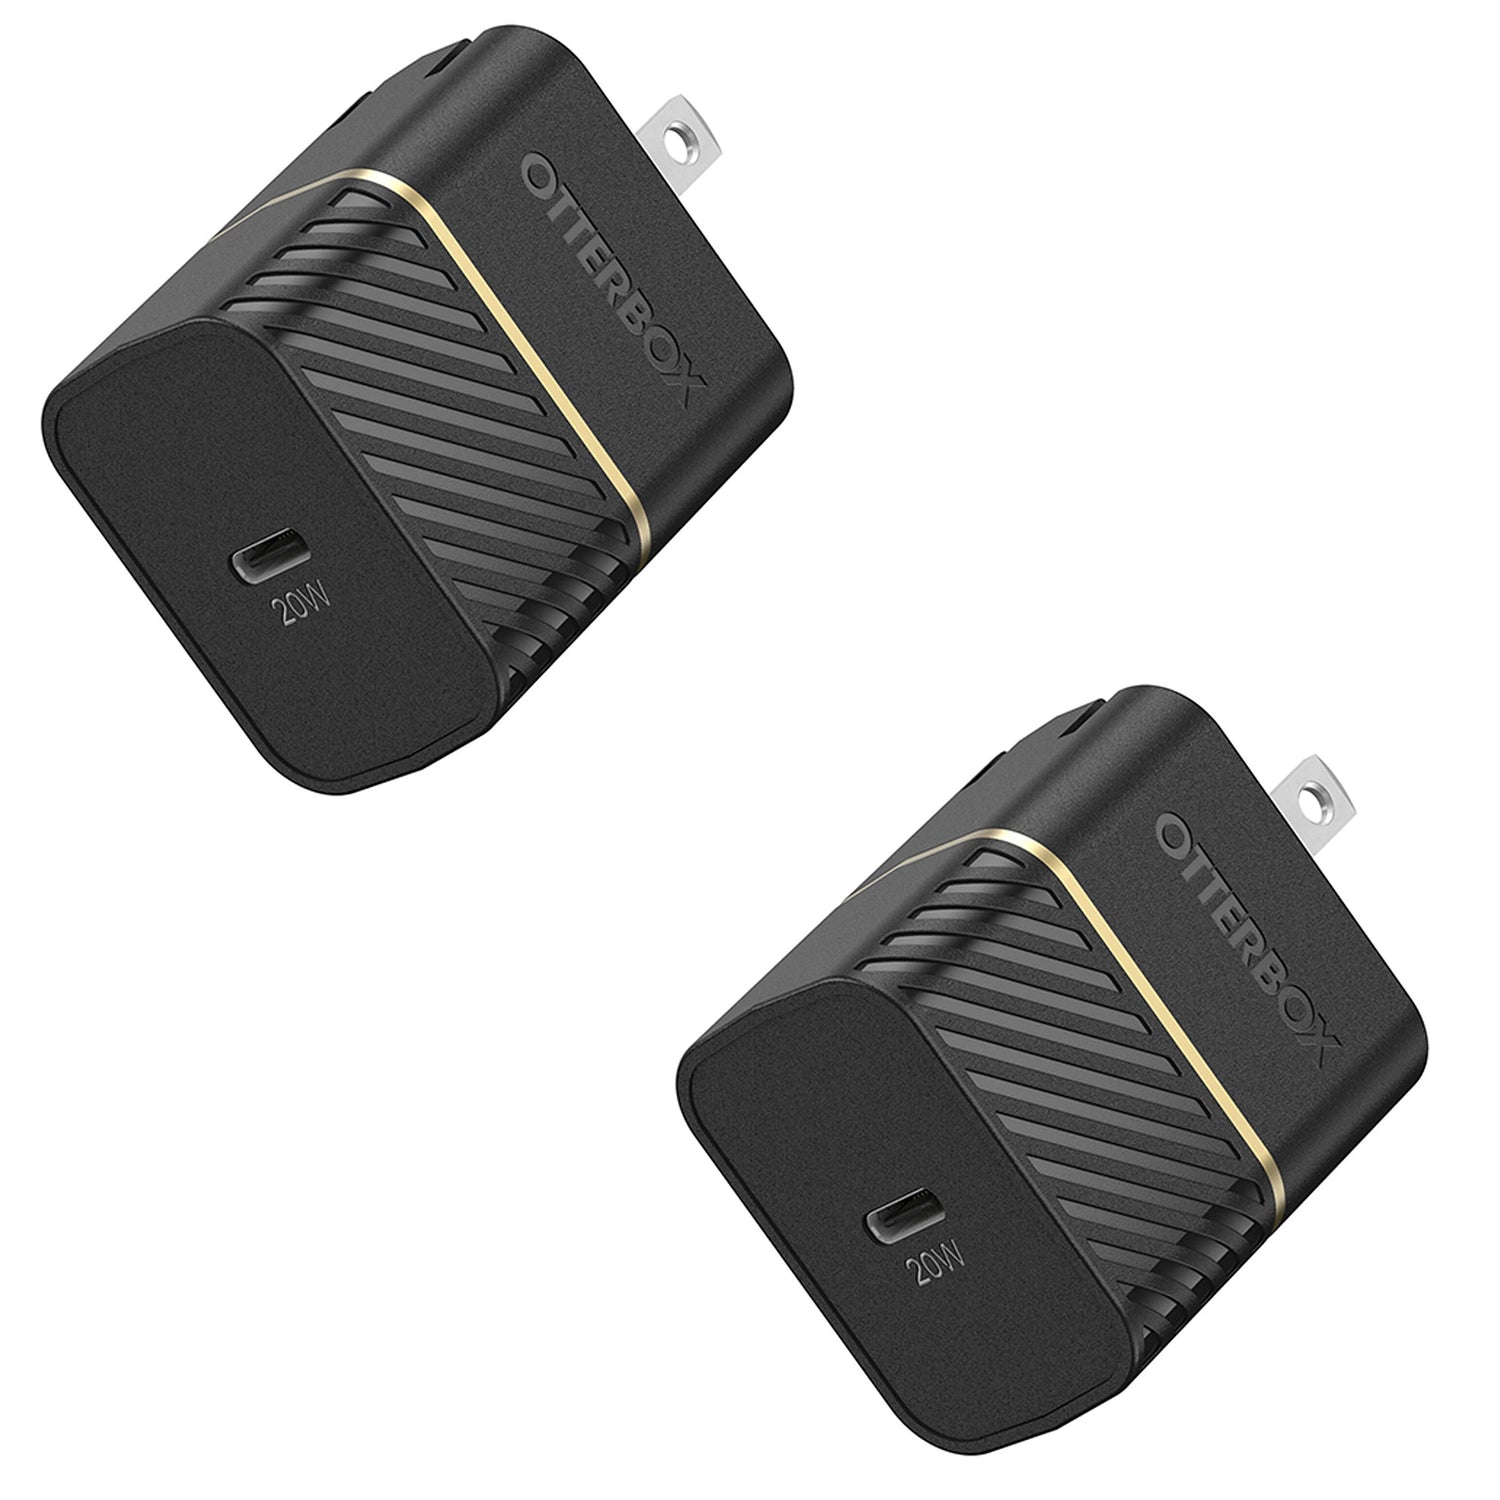 OtterBox USB-C Fast Charge Wall Charger 20W (2-Pack) - Black Shimmer (New)